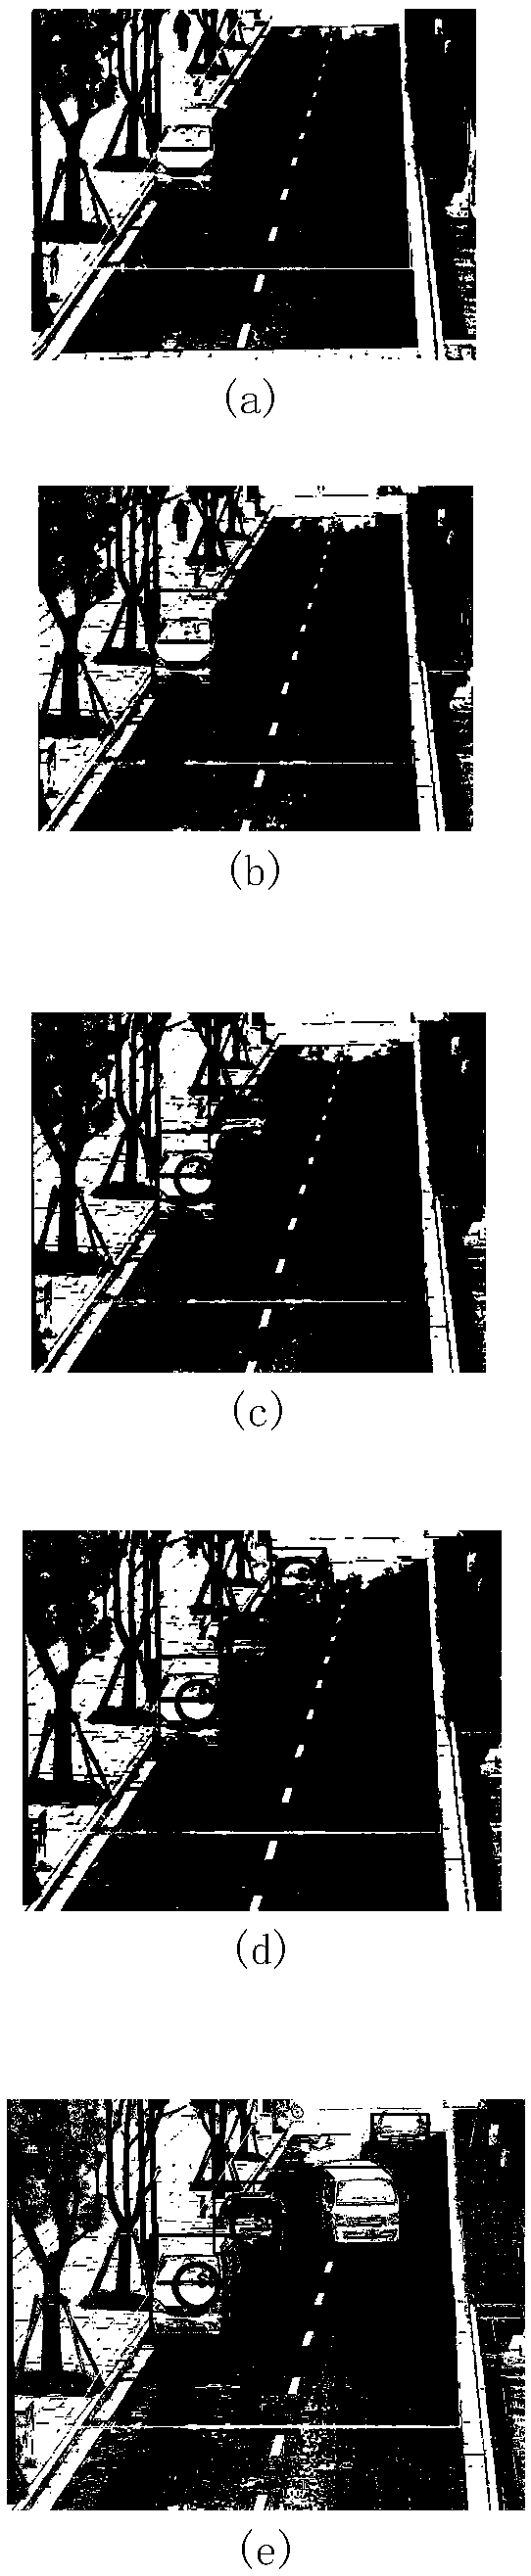 Vehicle illegal parking detection method based on convolutional neural network